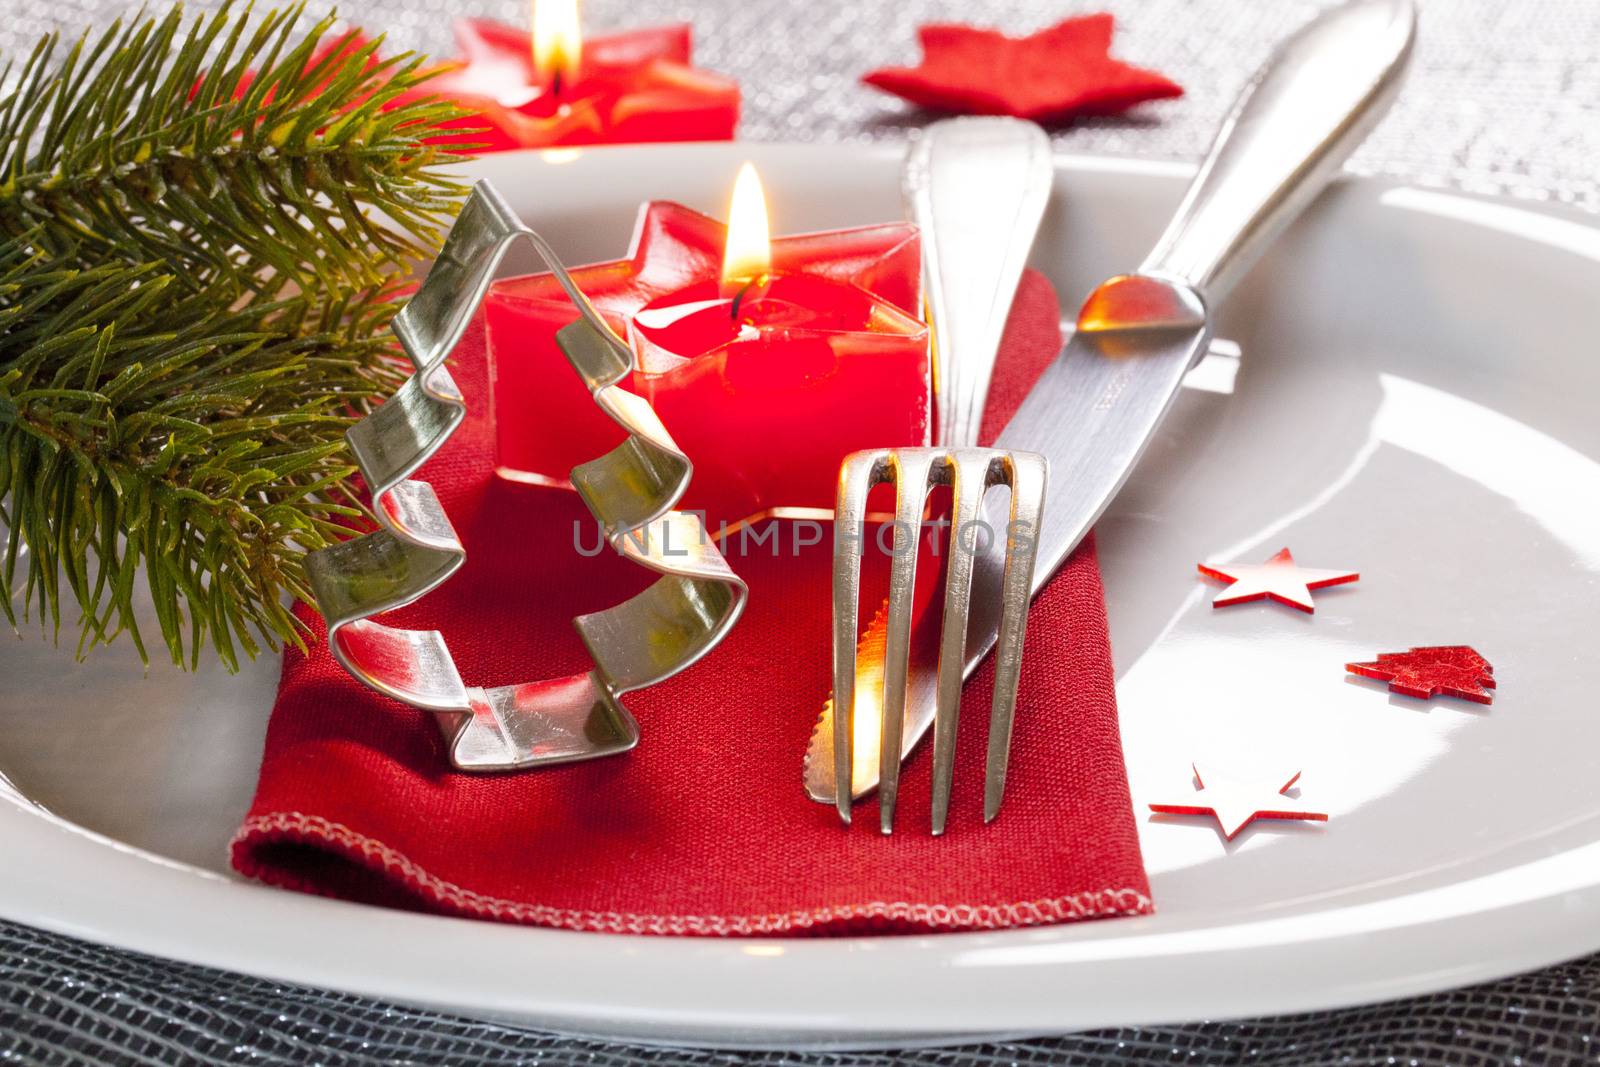 table setting for christmas by Bestpictures